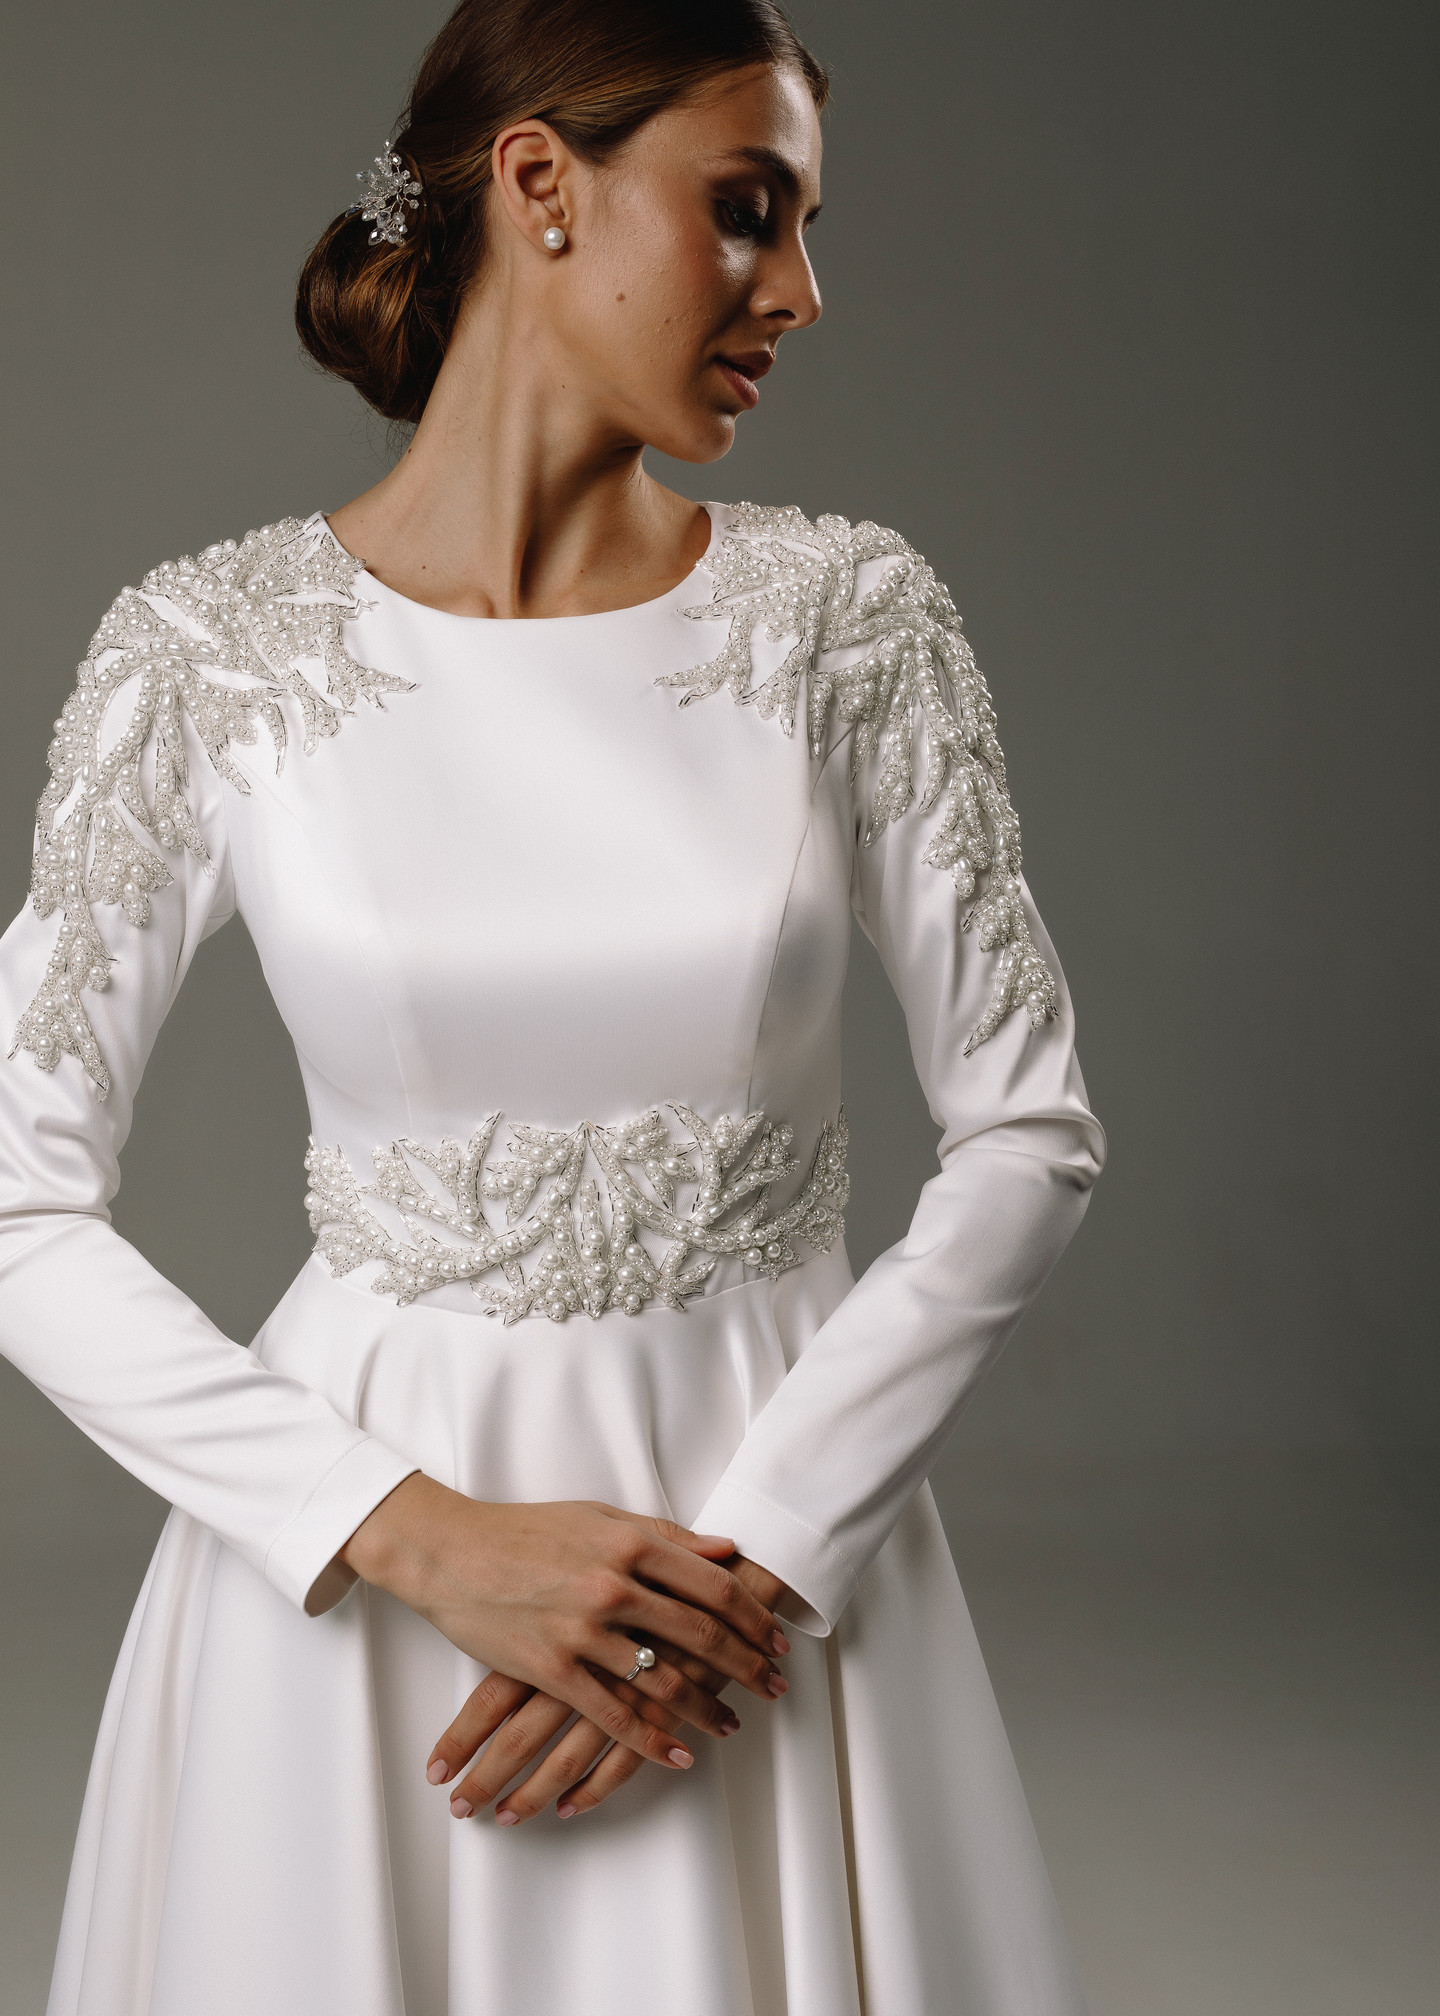 Sara gown, 2020, couture, dress, bridal, off-white, embroidery, sleeves, A-line, archive